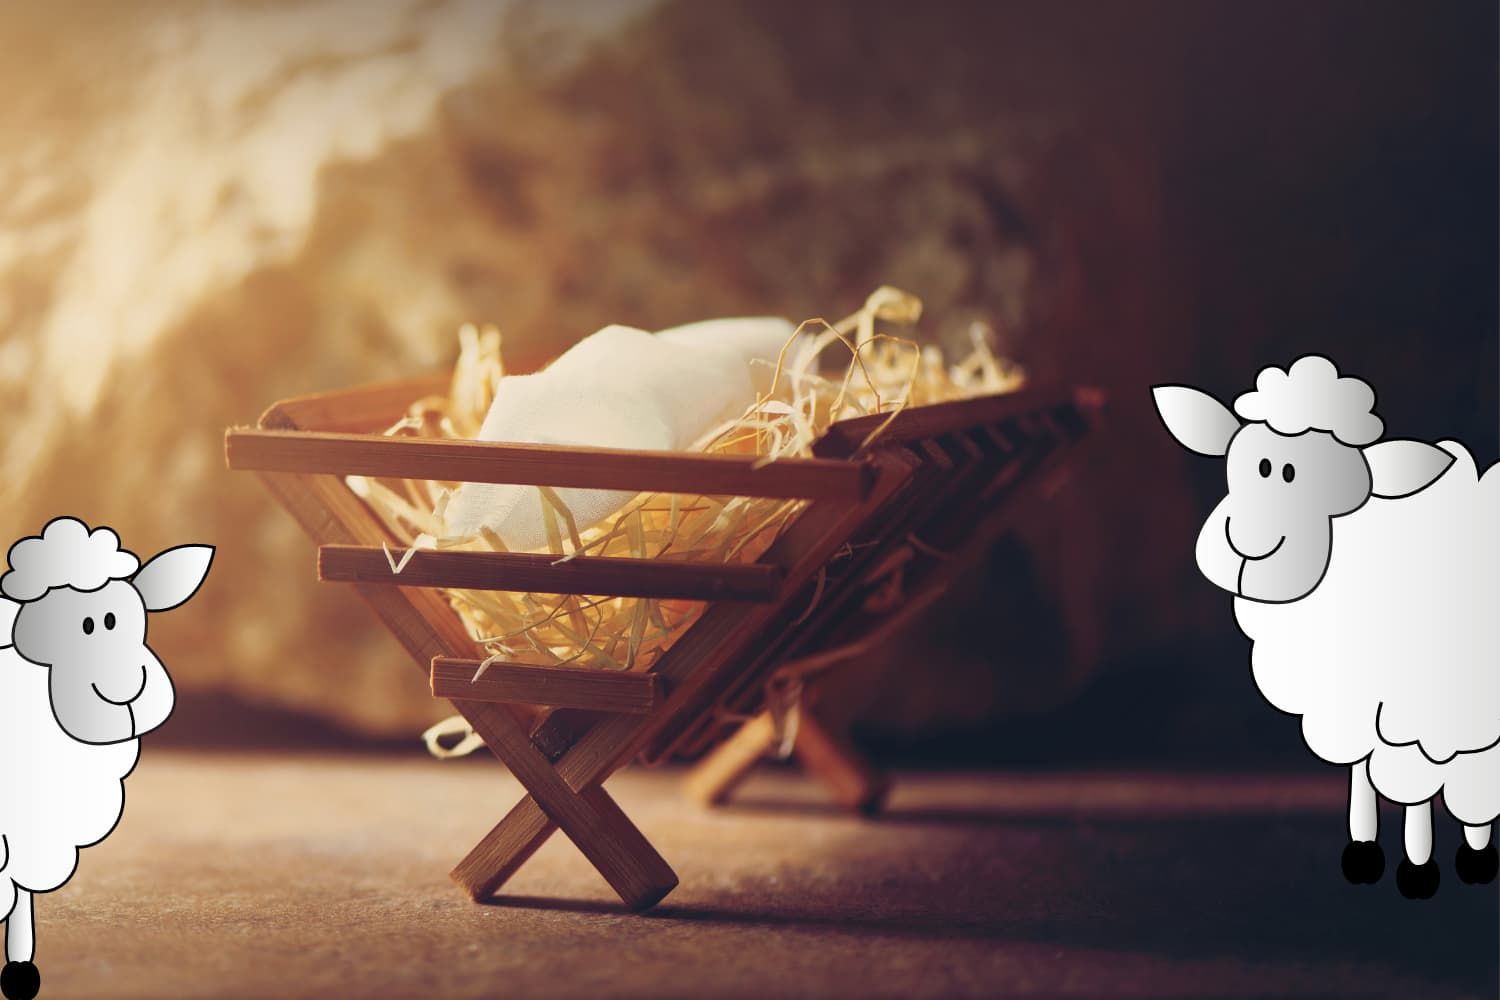 Lesson%20-%20NT%20Christmas%205%20-%20The%20birth%20of%20Jesus%20Christ%2019%20activities-2c722b90 Christmas: The birth of Jesus